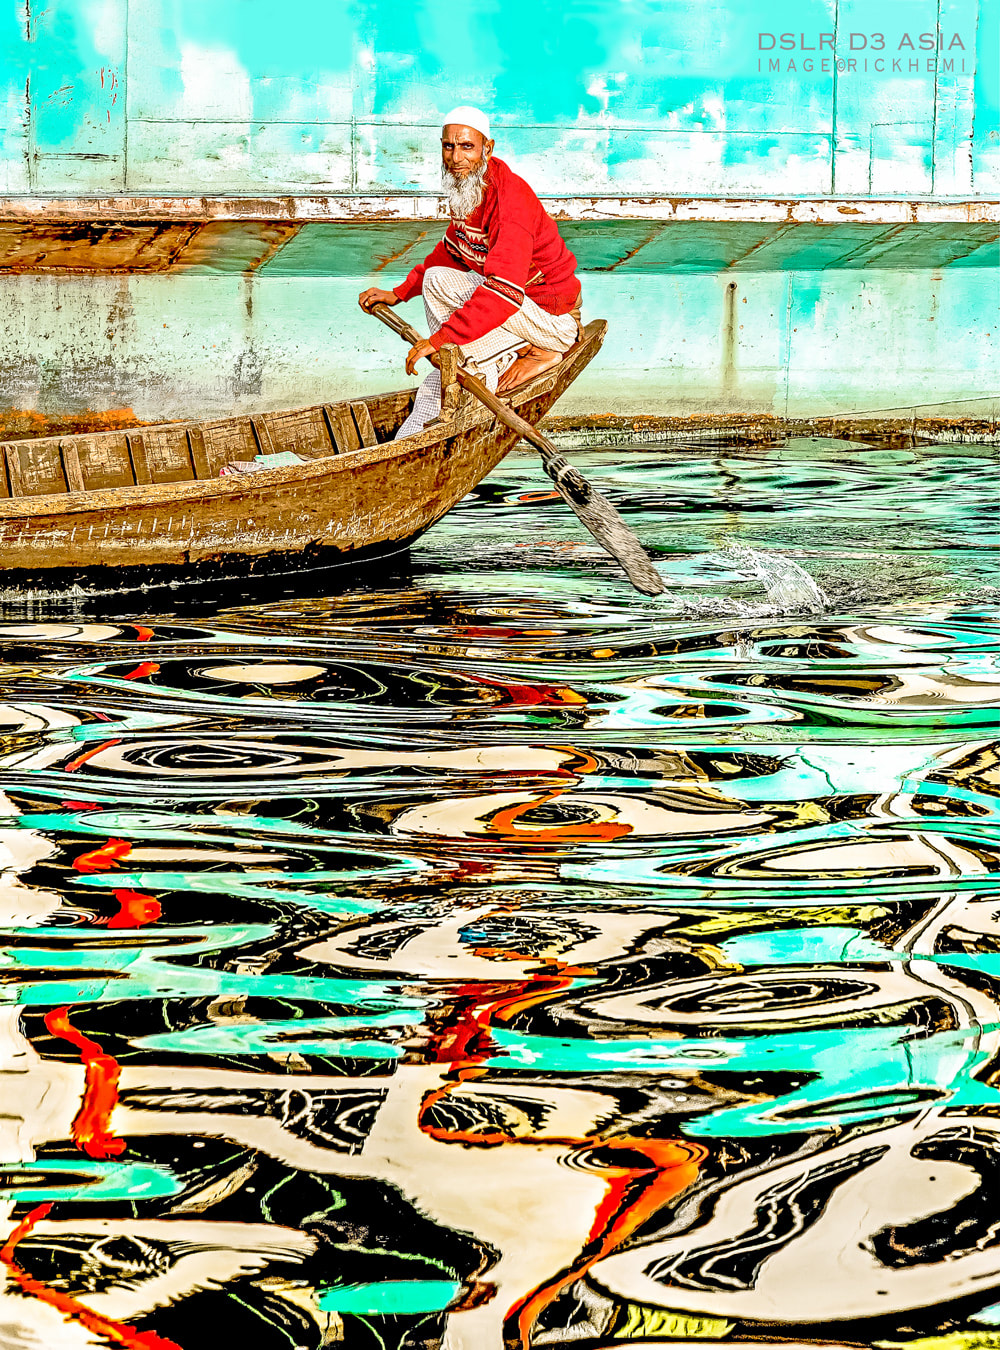 solo overland travel Asia, DSLR black water reflections Asia, image by Rick Hemi